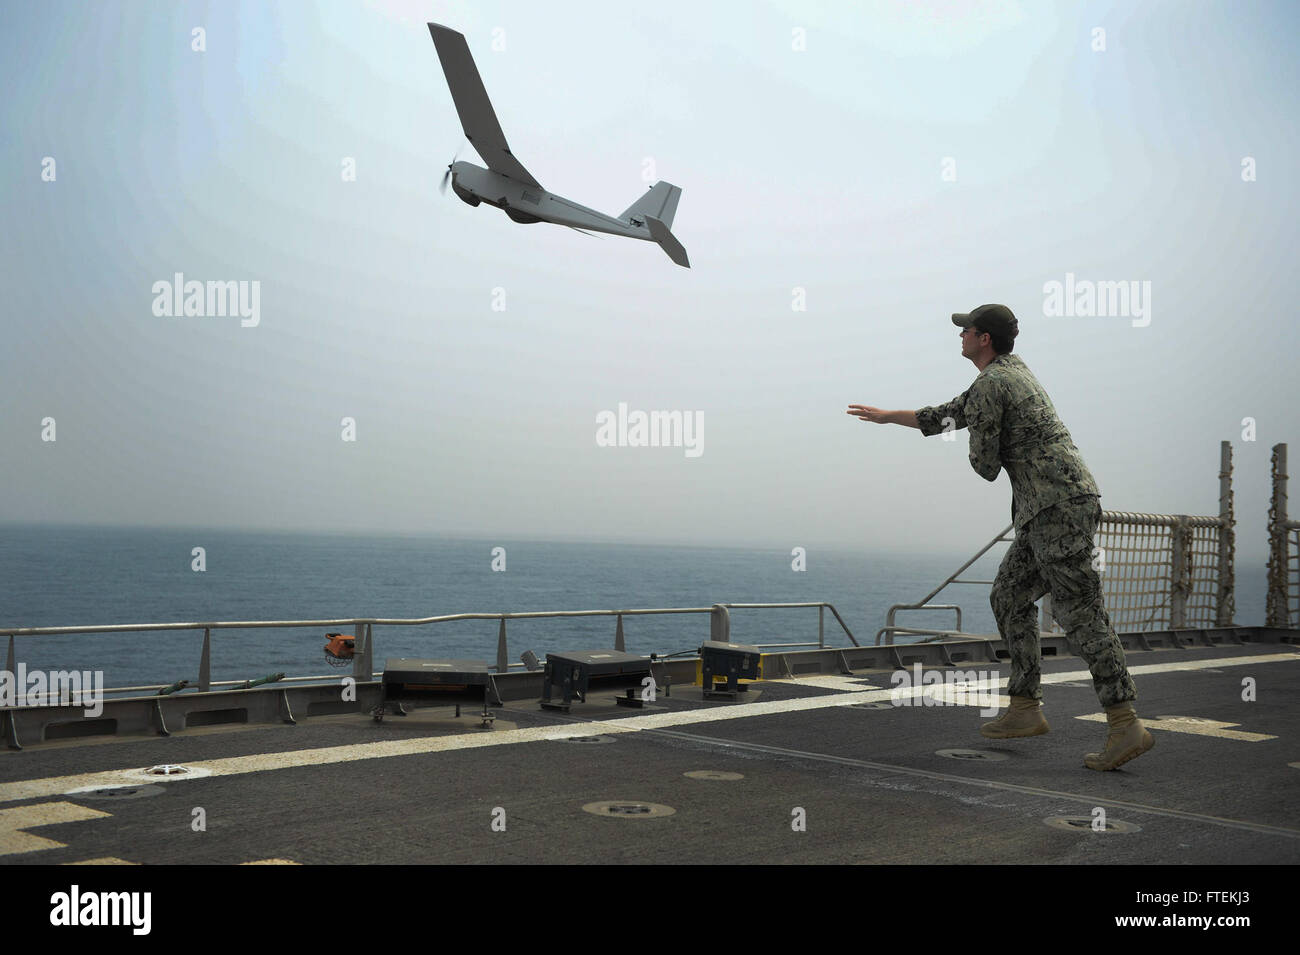 150129-N-RB579-072 ATLANTIC OCEAN (Jan. 29, 2015) Information Technology Specialist 2nd Class Joshua Lesperance launches a Puma unmanned aerial vehicle during maritime law enforcement operations aboard the USNS Spearhead (JHSV 1), Jan. 29, 2015. Spearhead is on a scheduled deployment to the U.S. 6th Fleet area of operations in support of the international collaborative capacity-building program Africa Partnership Station. (U.S. Navy photo by Mass Communication Specialist 1st Class Joshua Davies/Released) Stock Photo